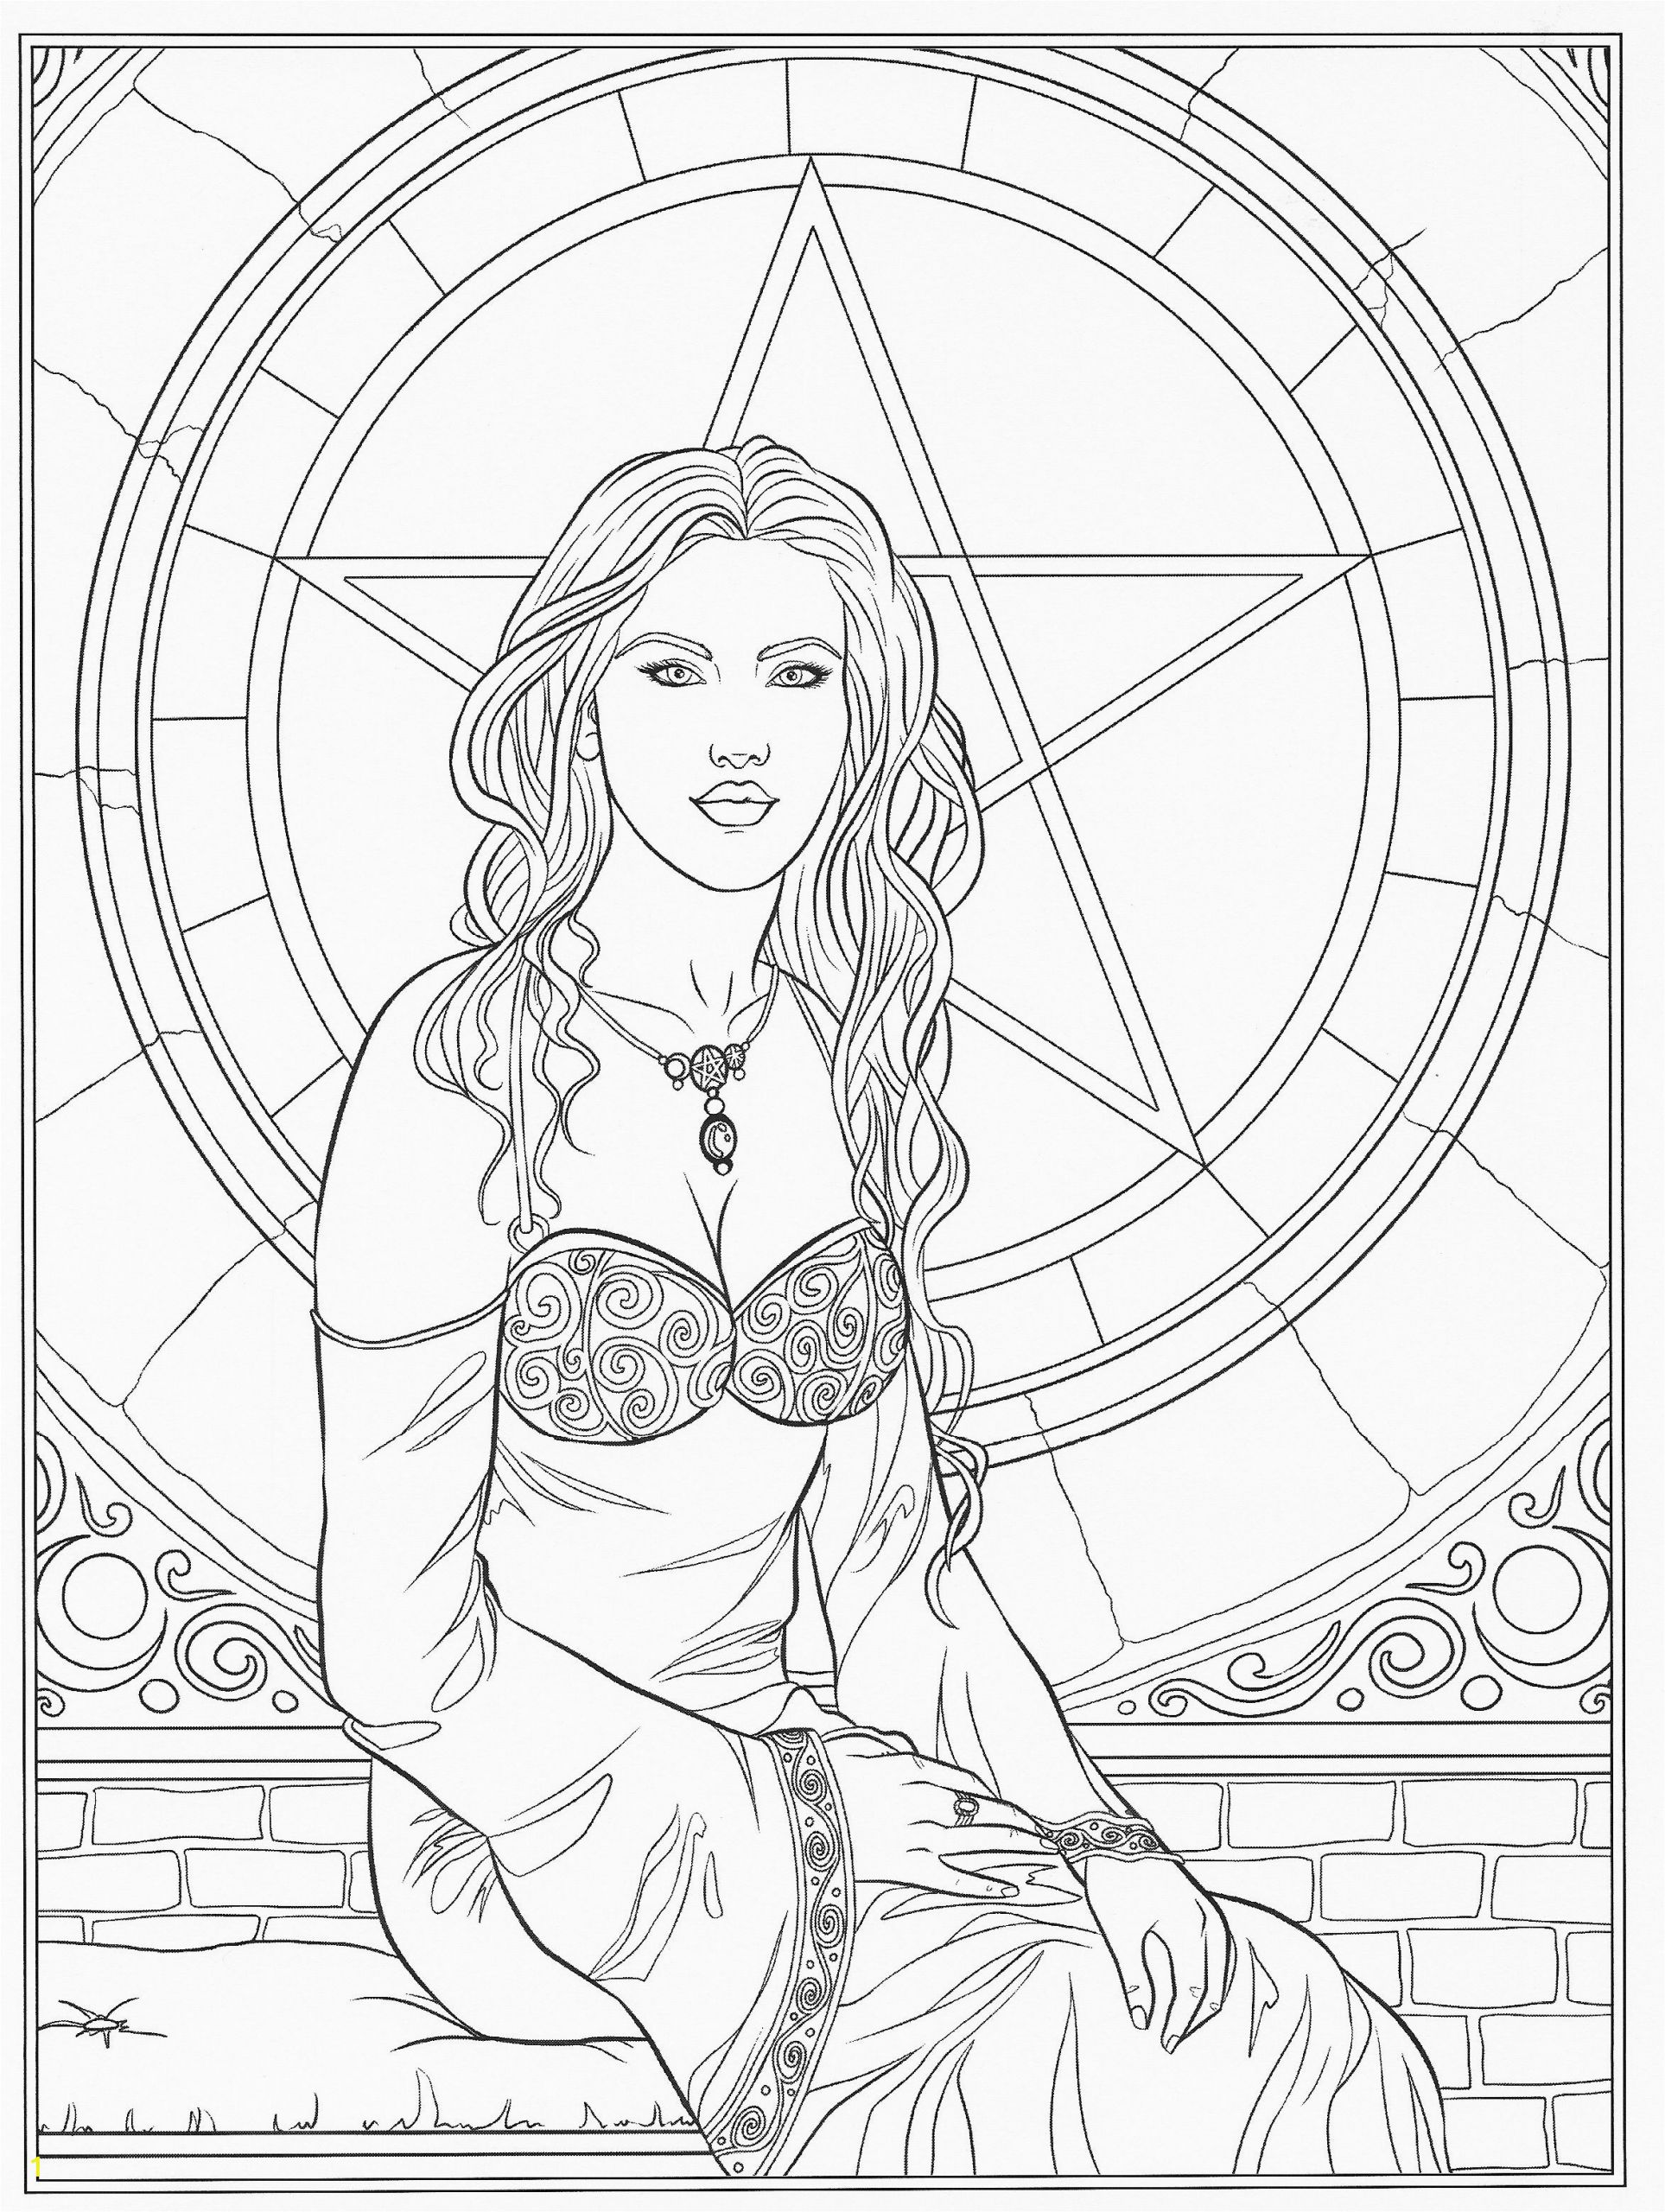 Pagan Witch Coloring Pages for Adults Adult Coloring Goddess Coloring